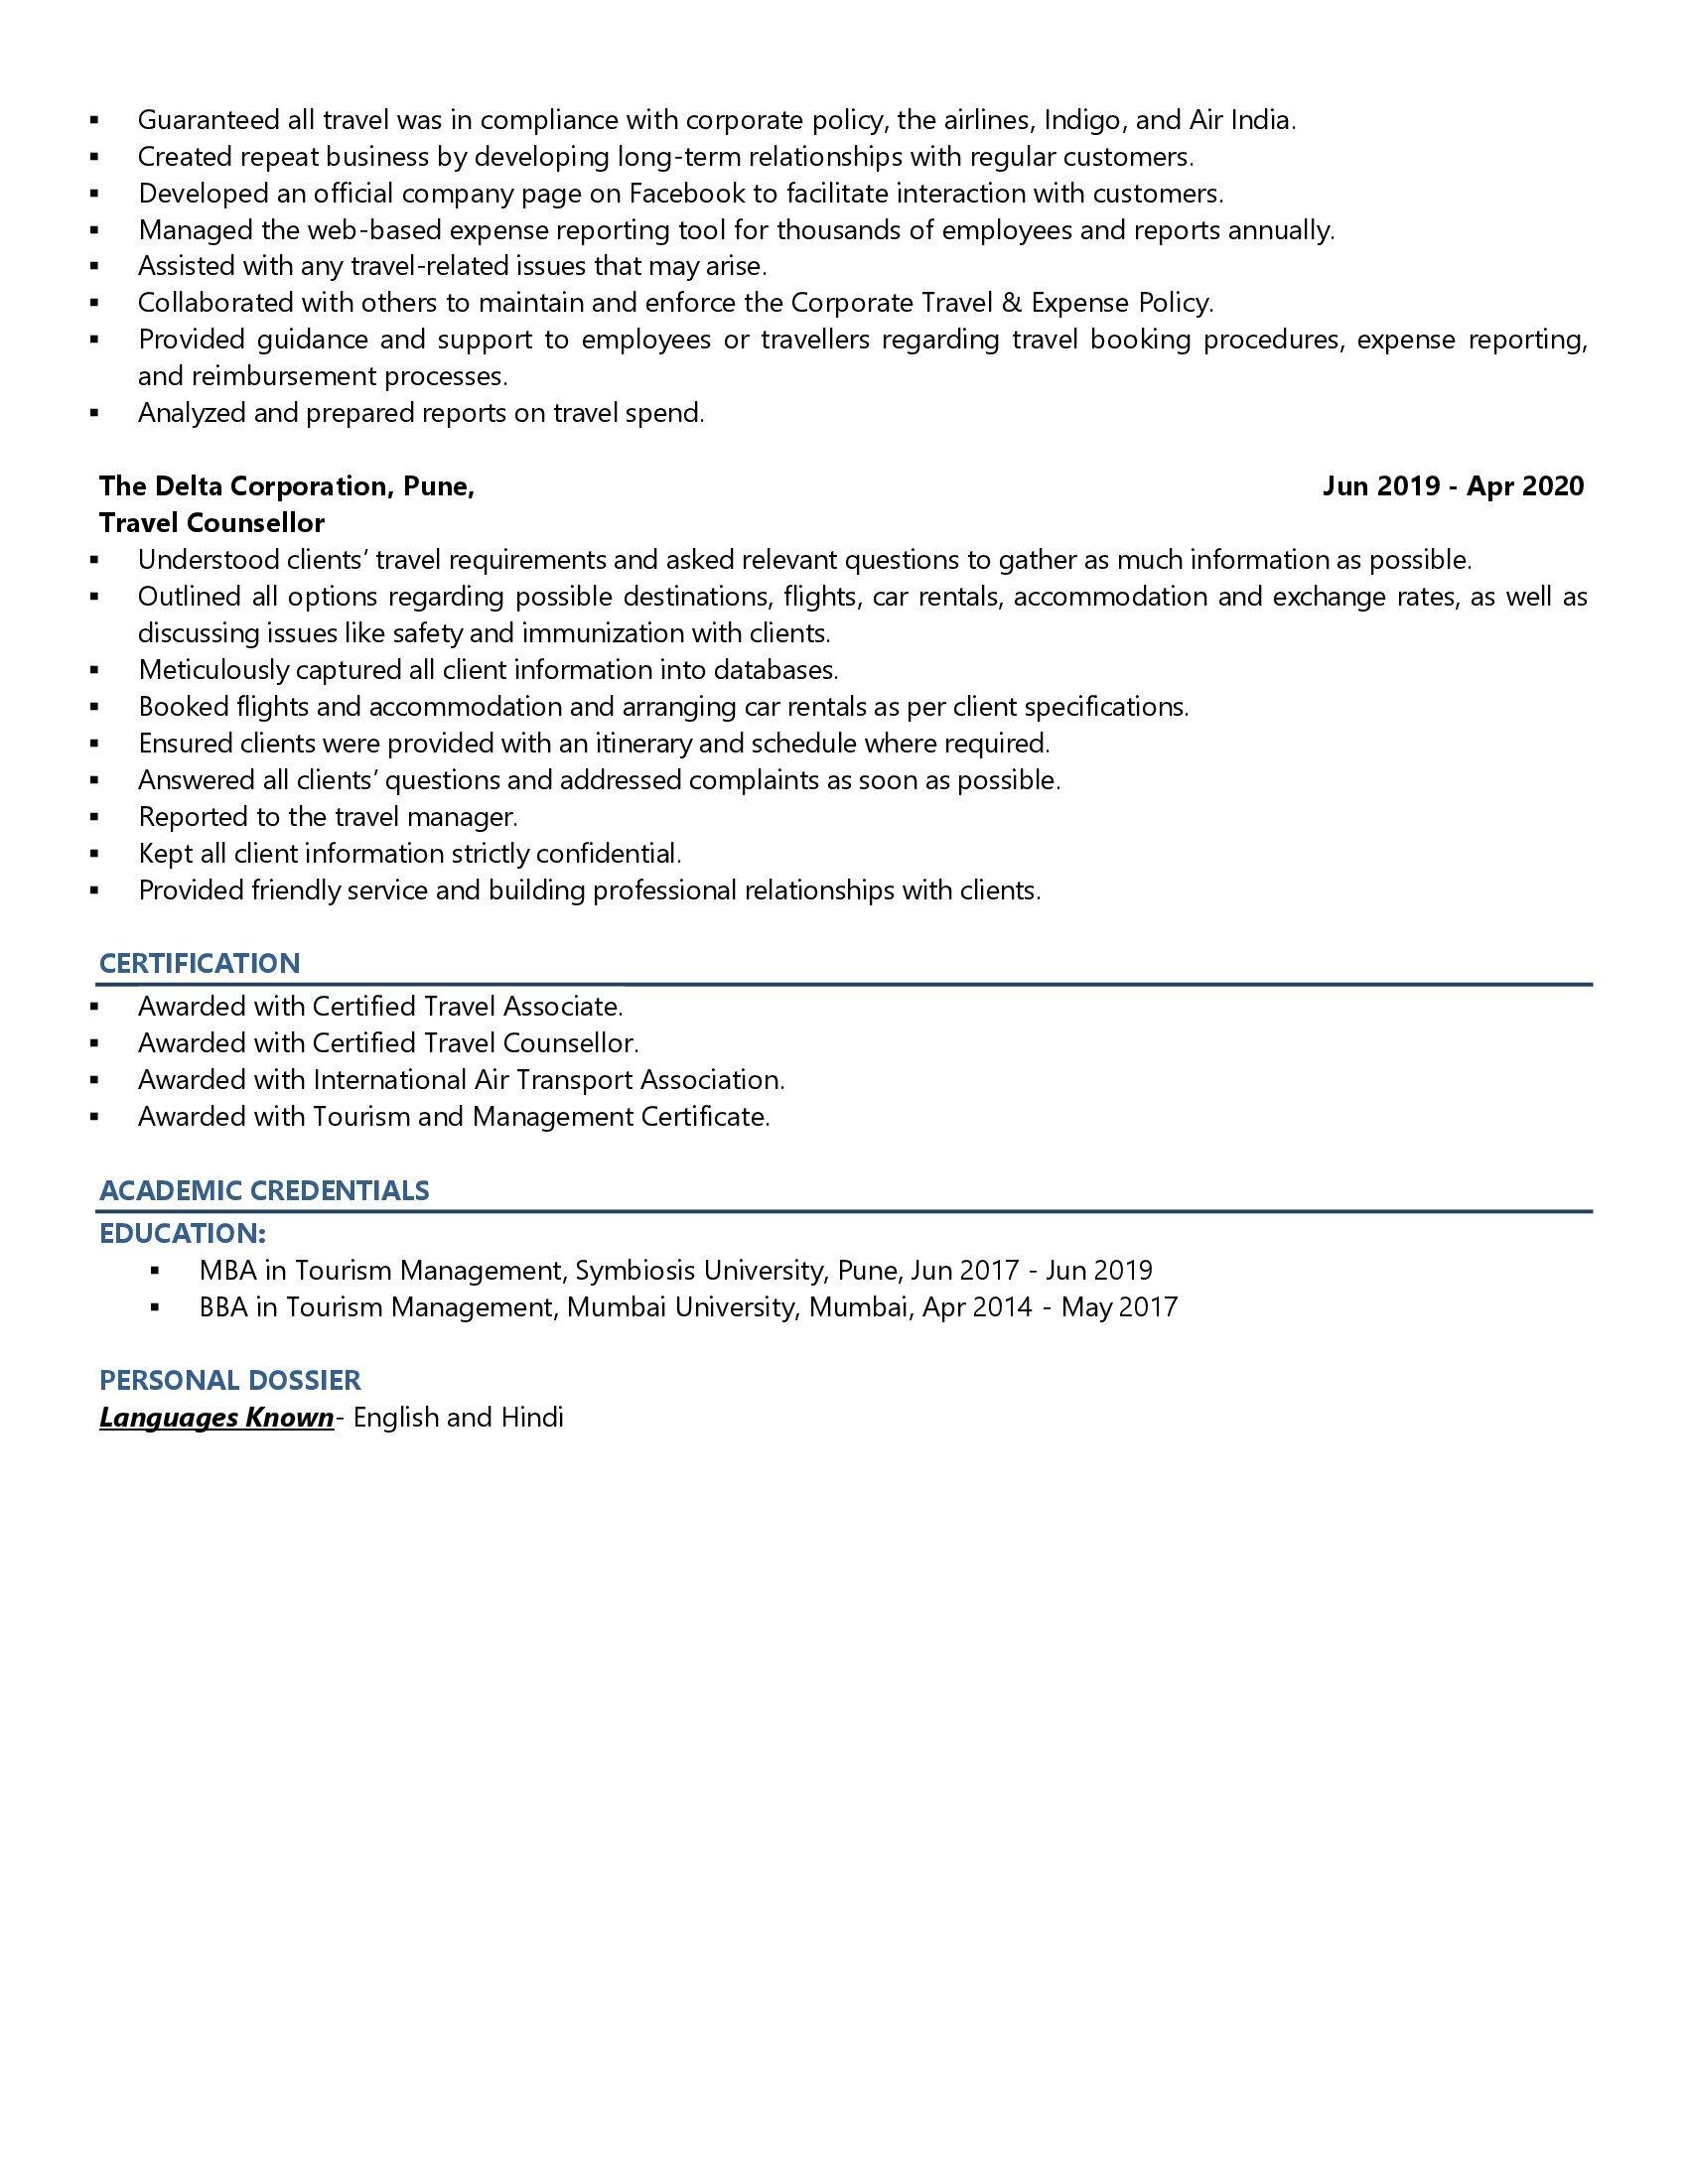 Travel Manager - Resume Example & Template